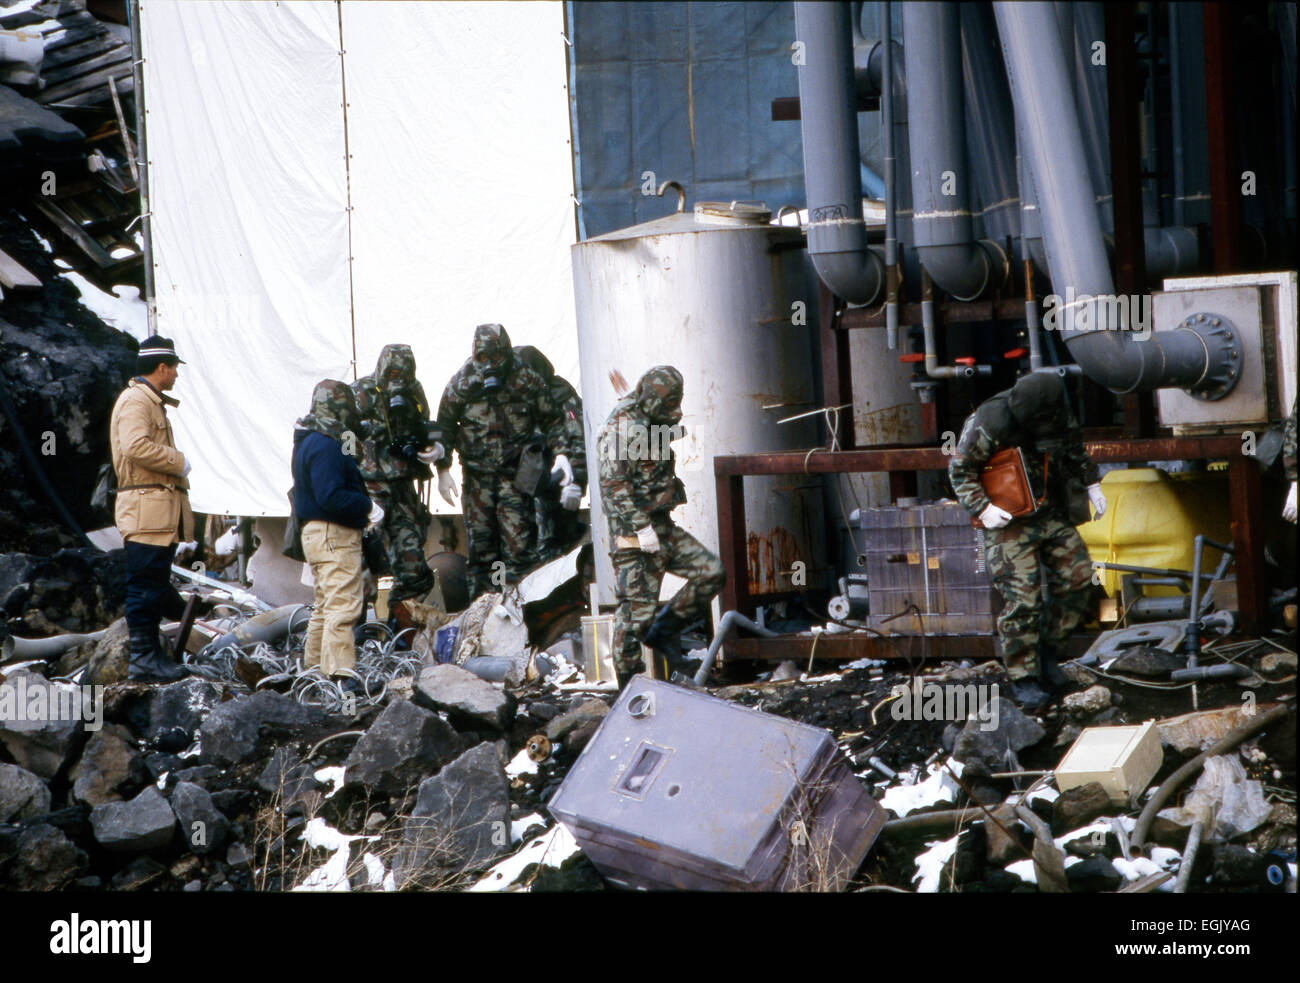 March, 1995, Kamikuisshiki Mura, Japan - Police confiscate explosives, chemical weapons and biological warfare agents during a raid on Aum's facility - No. 7 Satyam - on the foot of Mt. Fuji in March 1995. On the morning of 20 March 1995, cult members released sarin in a coordinated attack on five trains in the Tokyo subway system, killing 13 commuters, seriously injuring 54 and affecting 980 more. Some estimates claim as many as 6,000 people were injured by the sarin. © Haruyoshi Yamaguchi/AFLO/Alamy Live News Stock Photo